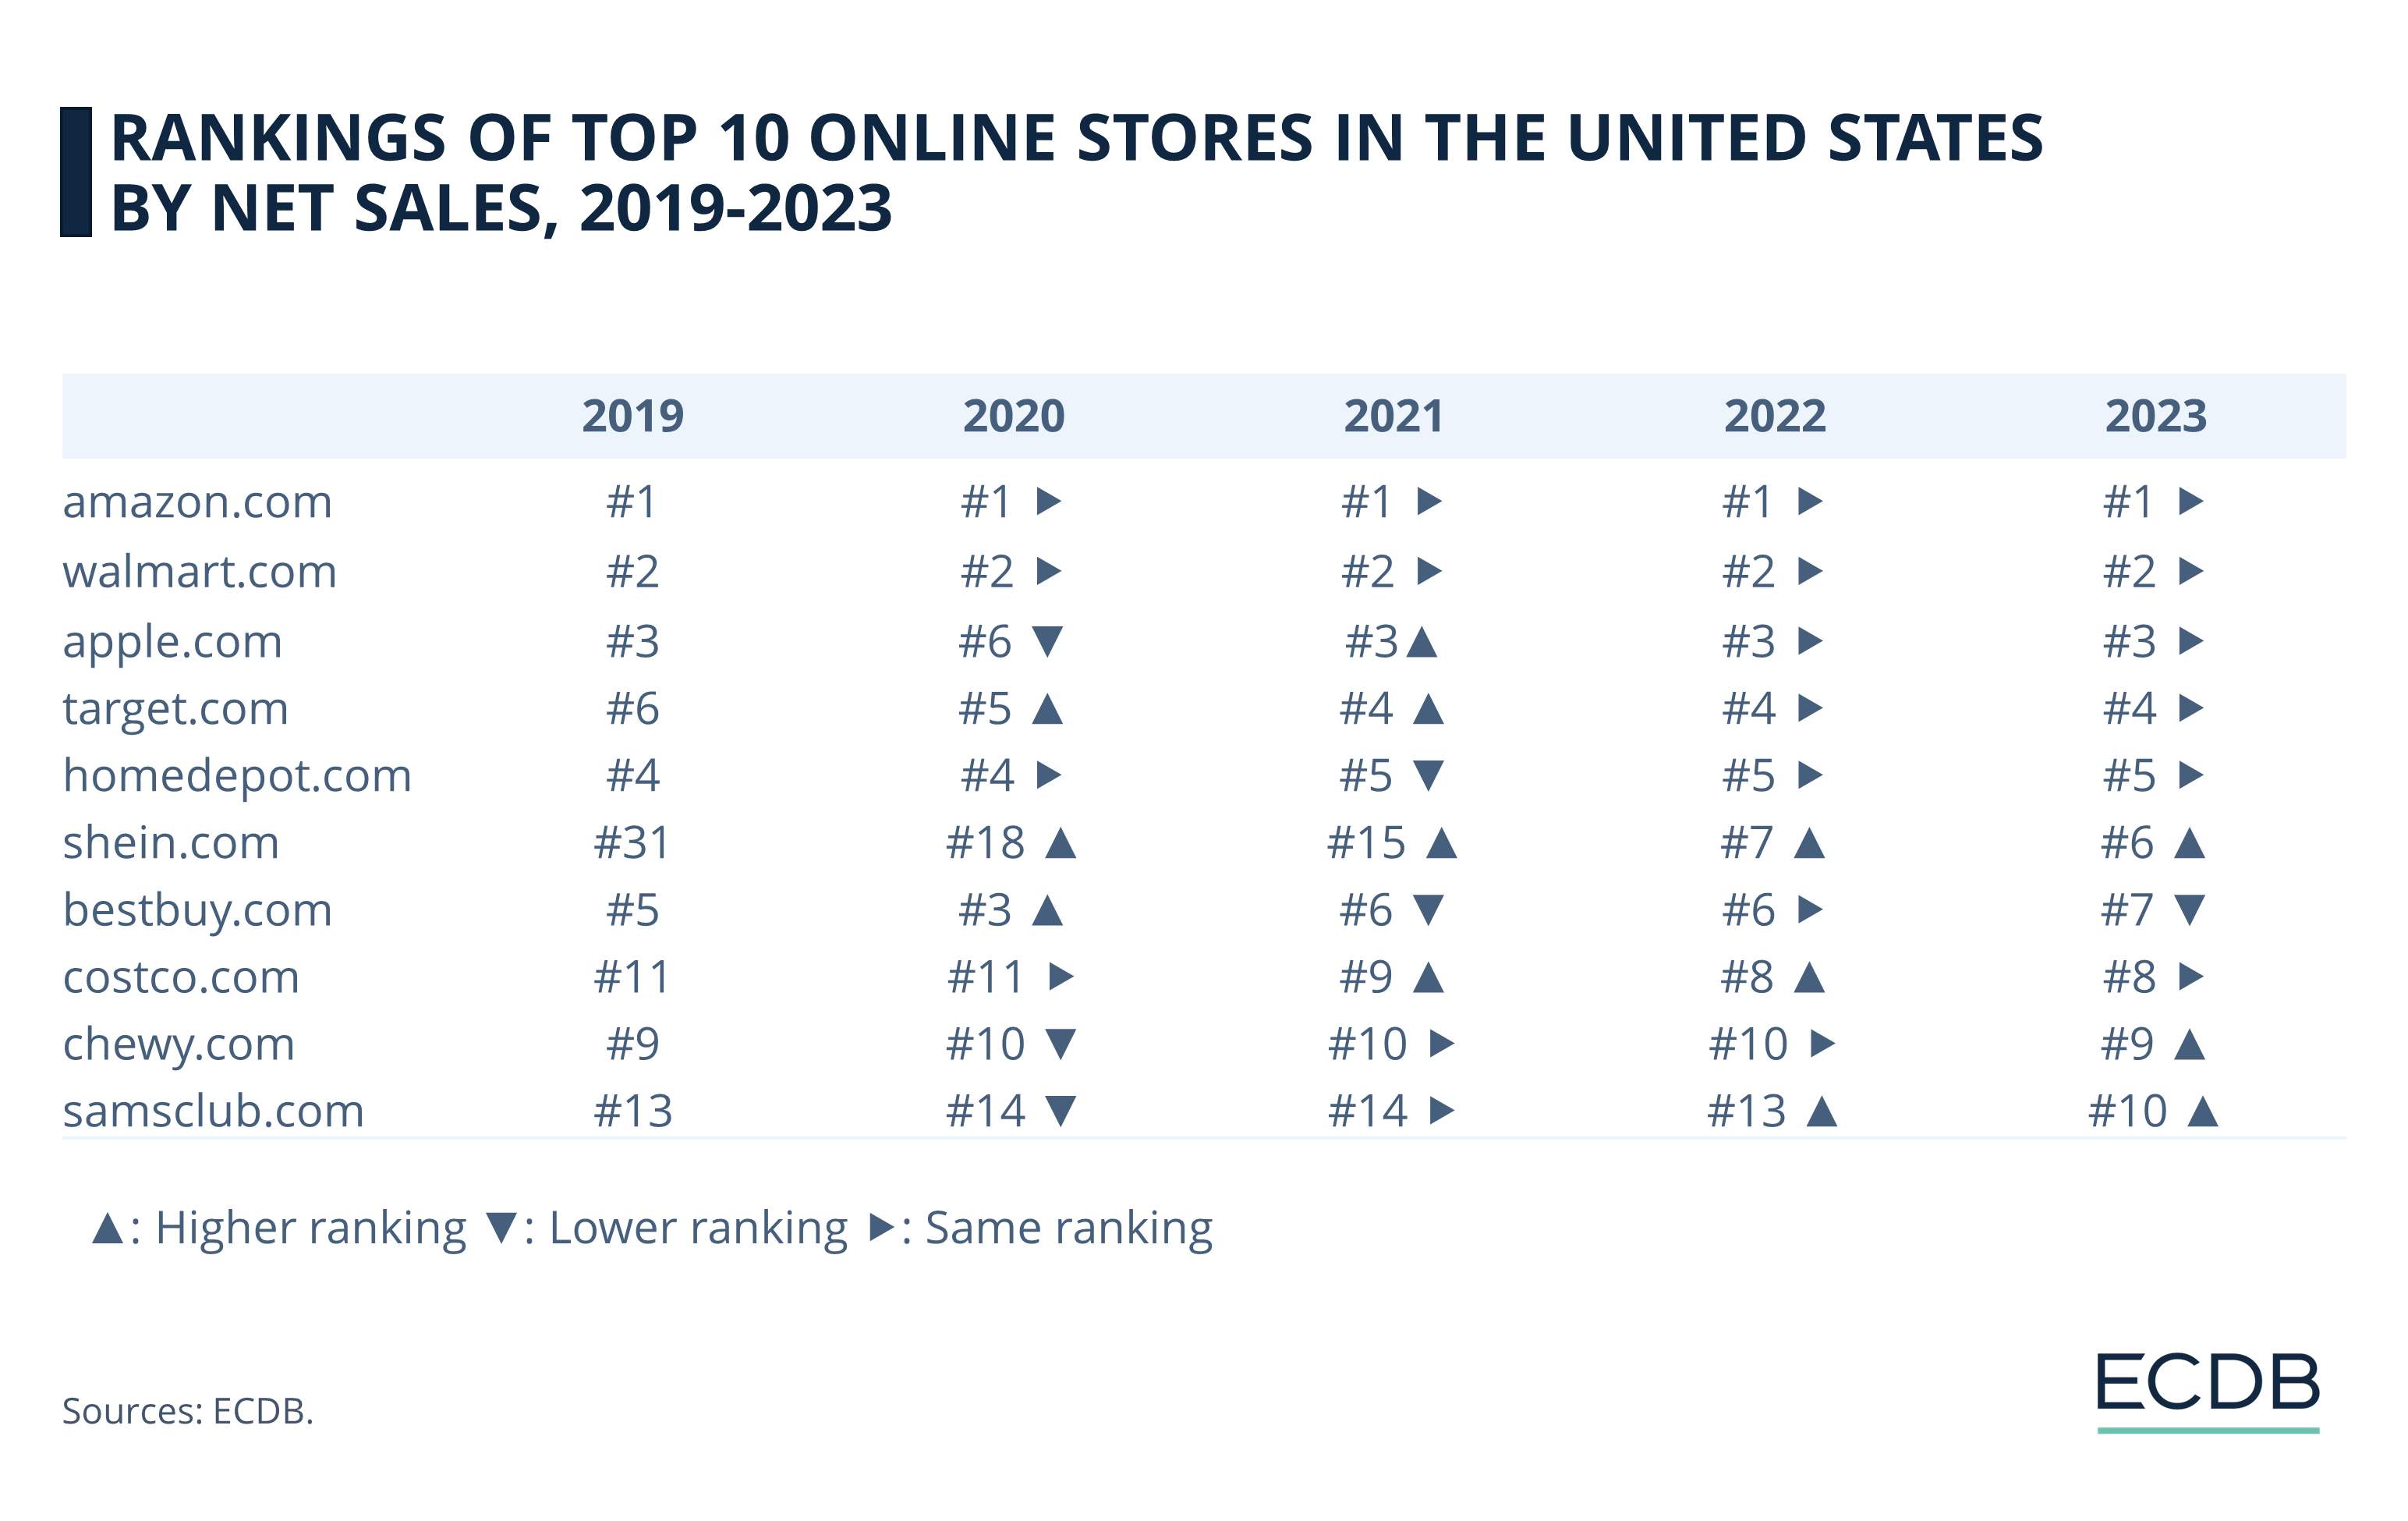 Rankings of Top 10 Online Stores in the United States by Net Sales, 2019-2023